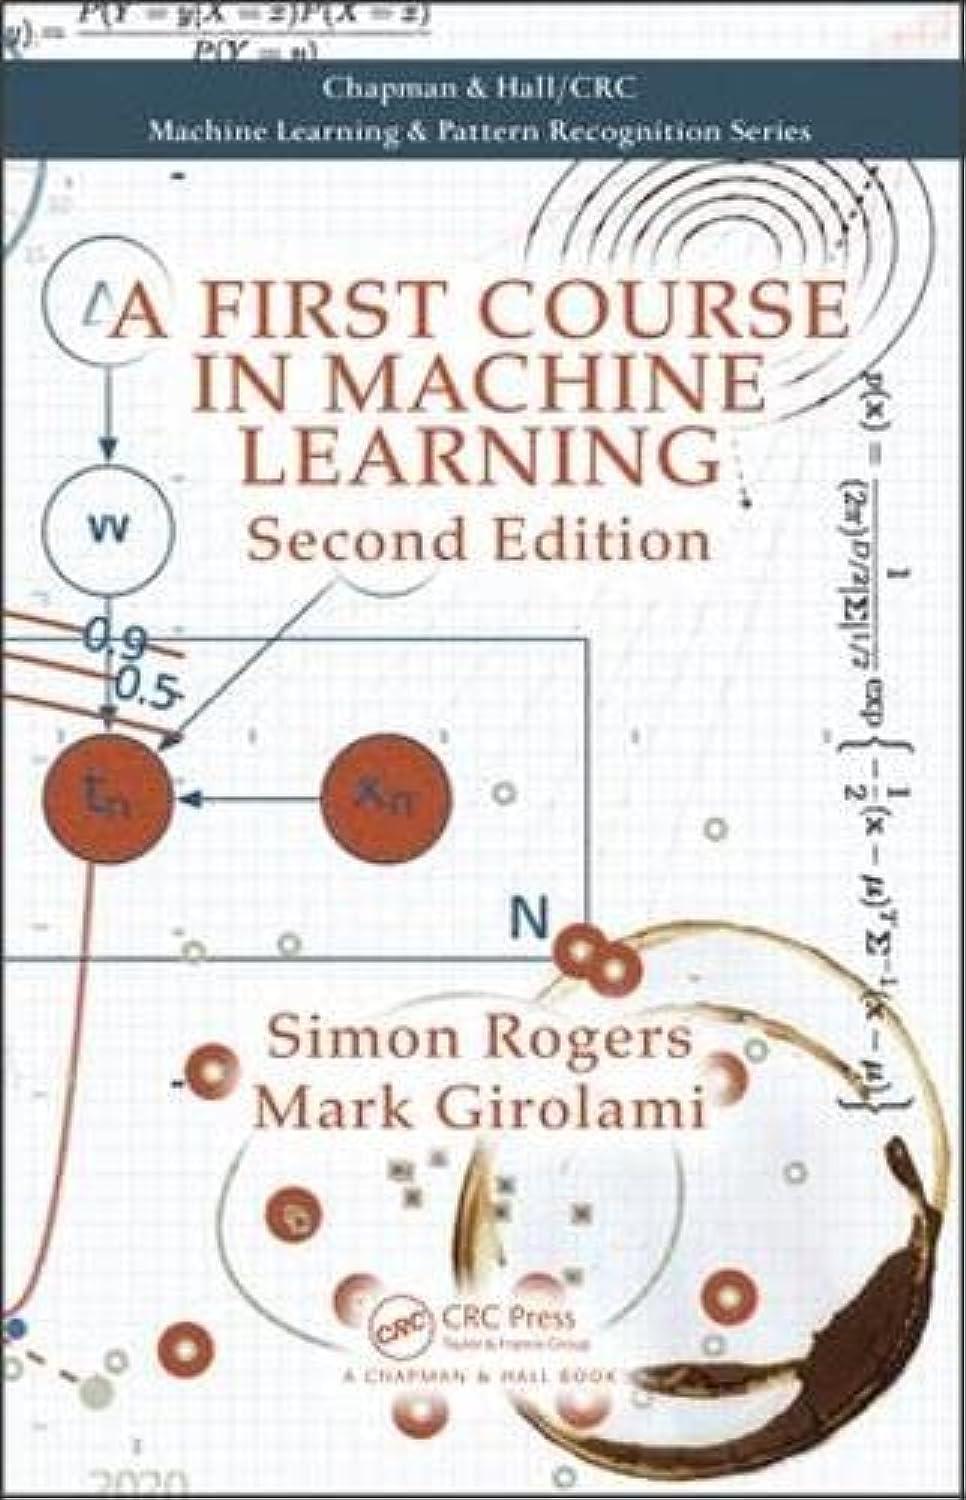 a first course in machine learning 2nd edition simon rogers , mark girolam 978-1498738484